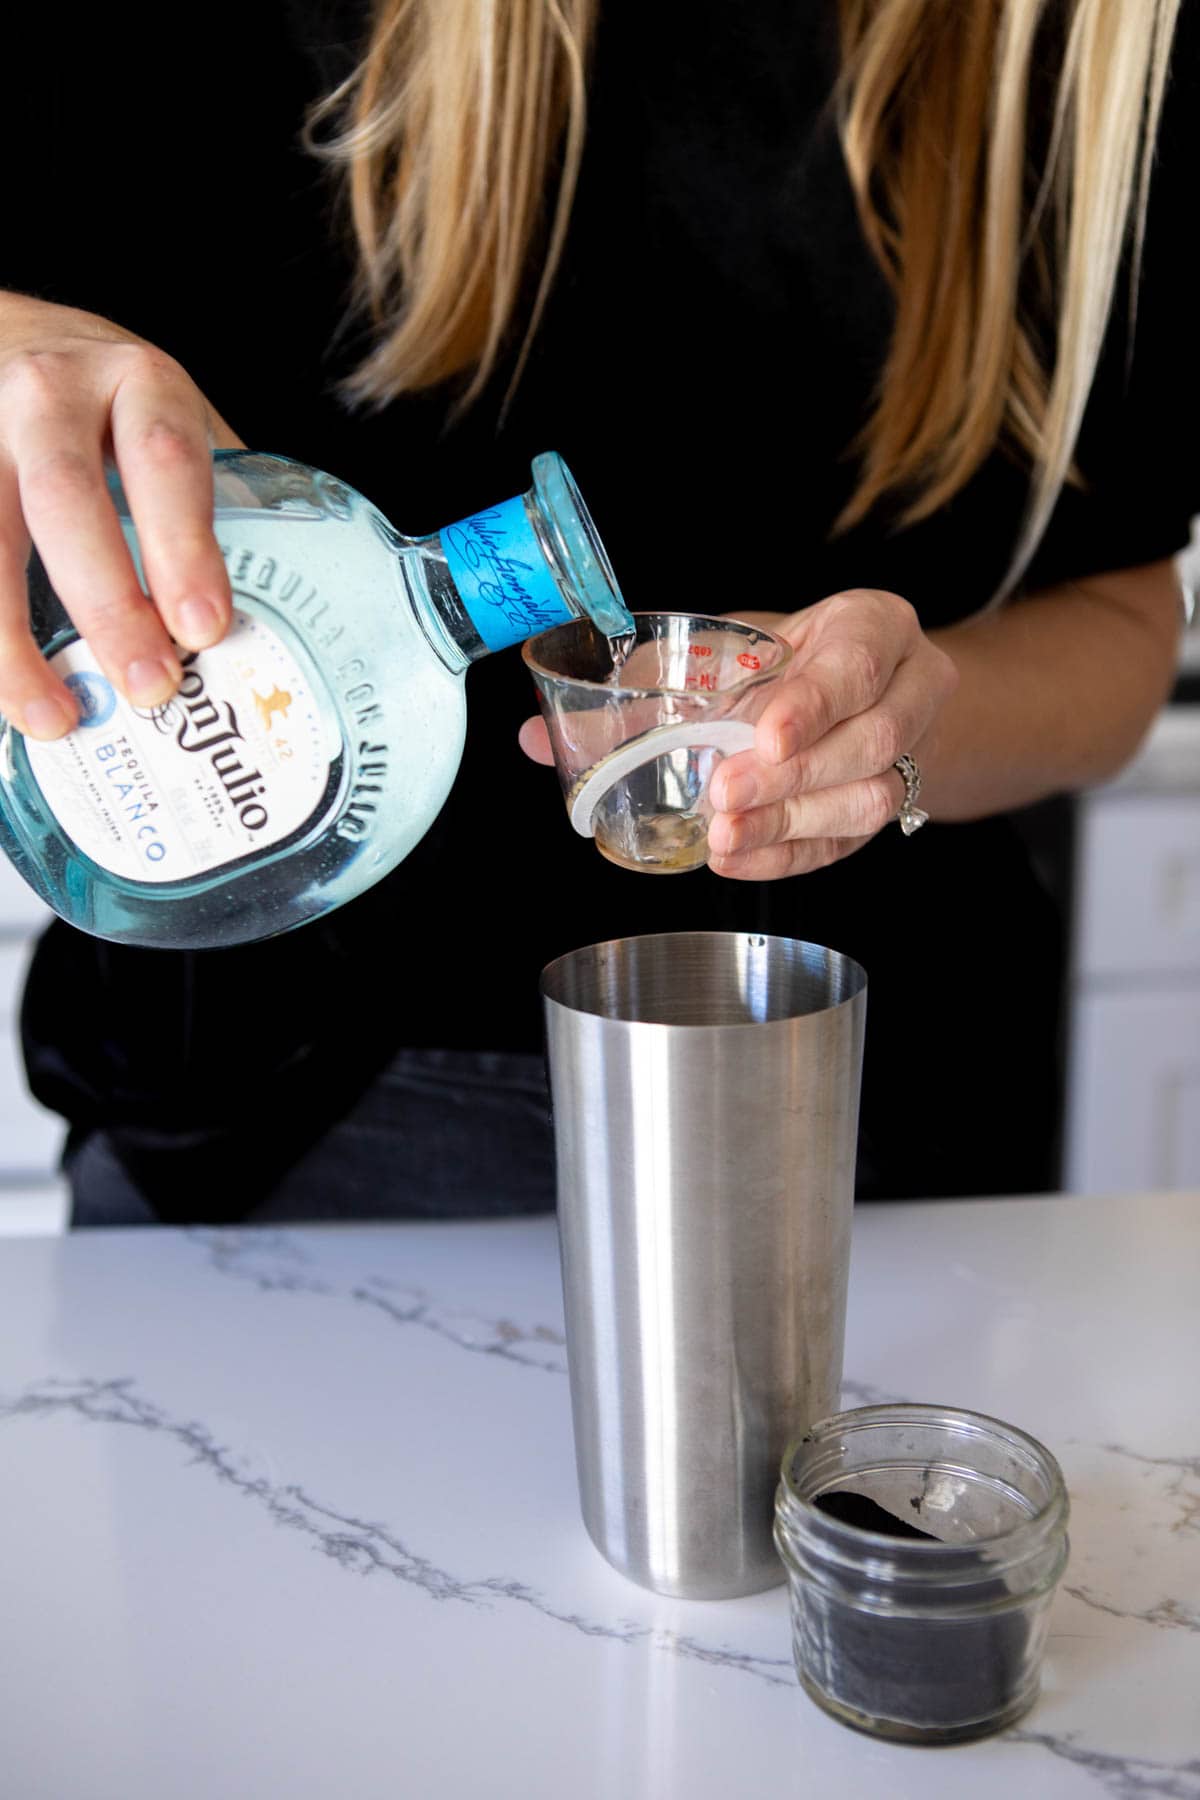 Woman pouring Don Julio tequila into a measuring cup and adding to a cocktail shaker.